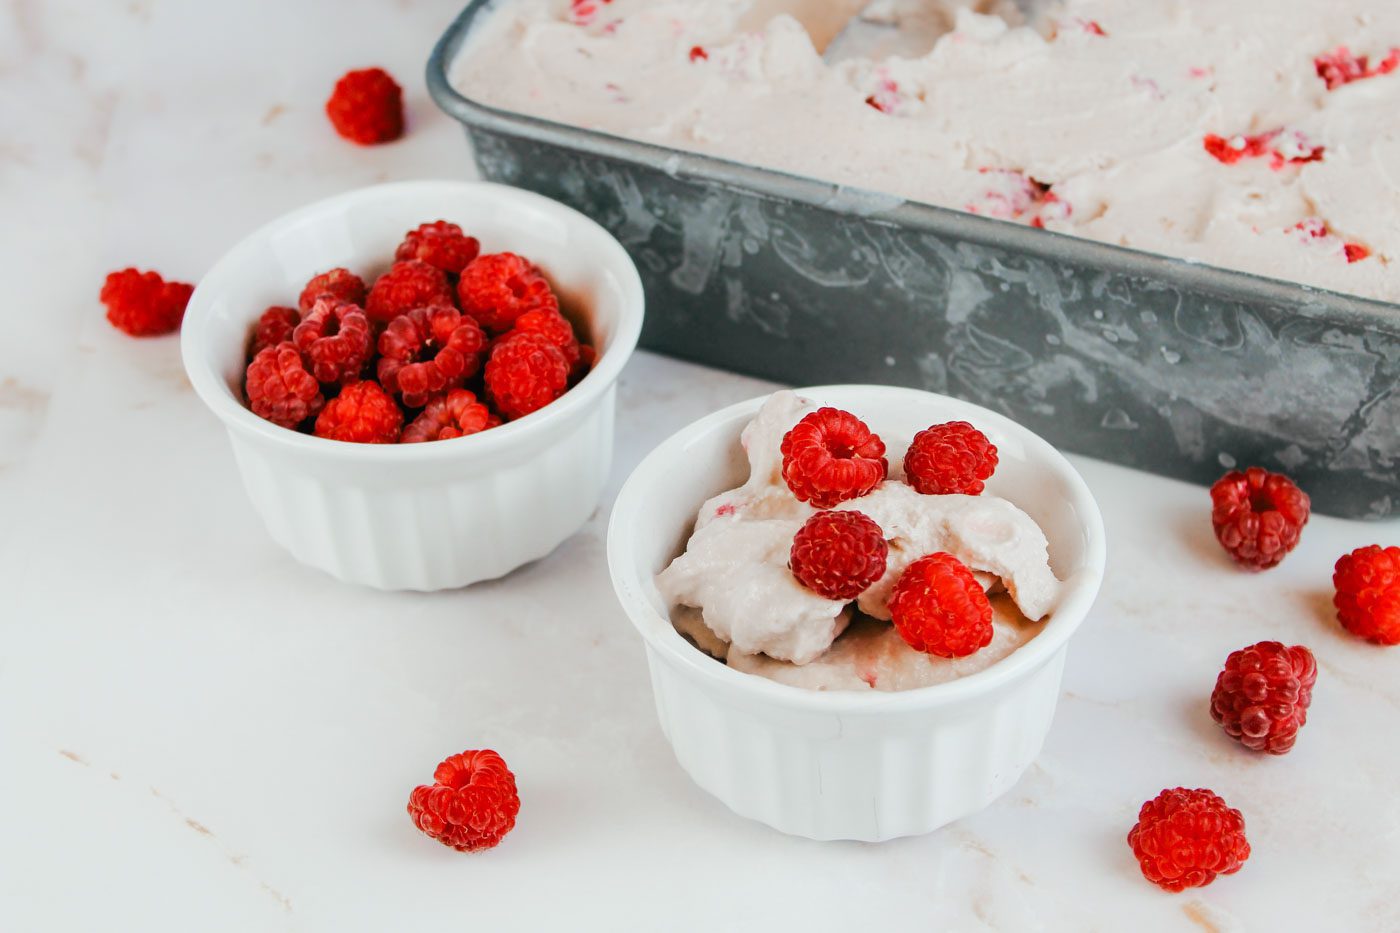 two custard bowls filled with ice cream and fresh raspberries